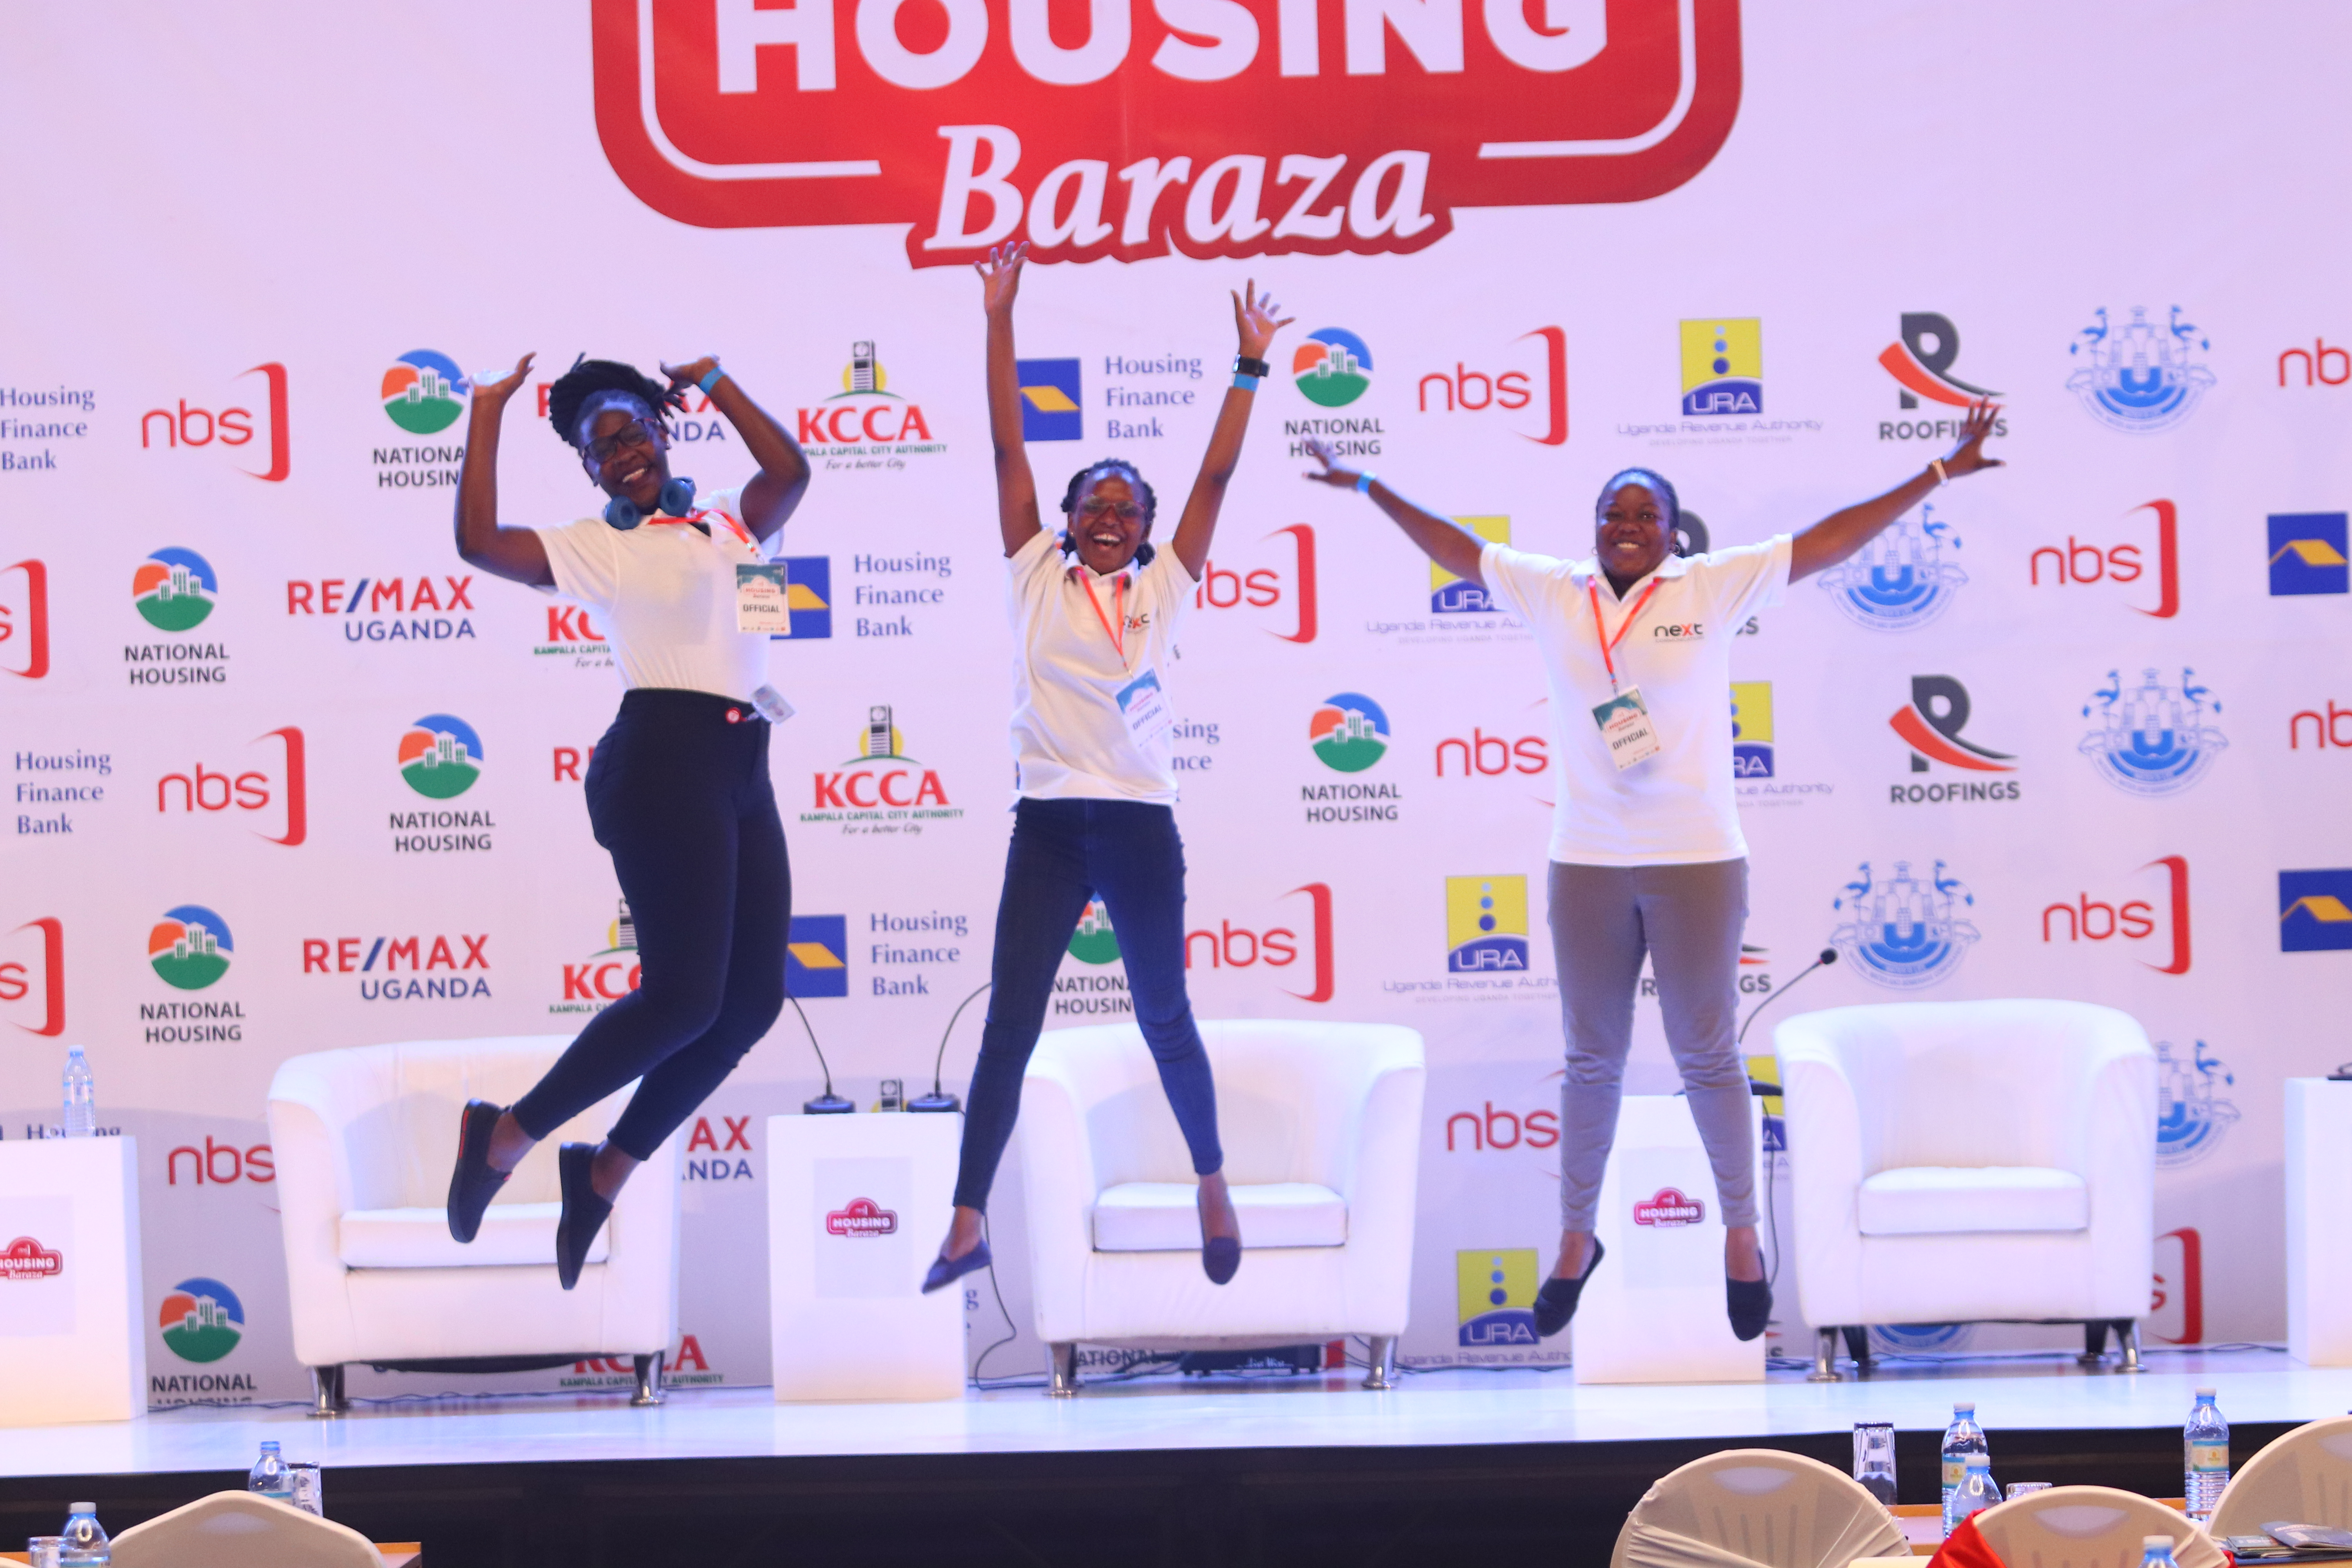 Why you should attend the NBS Housing Baraza